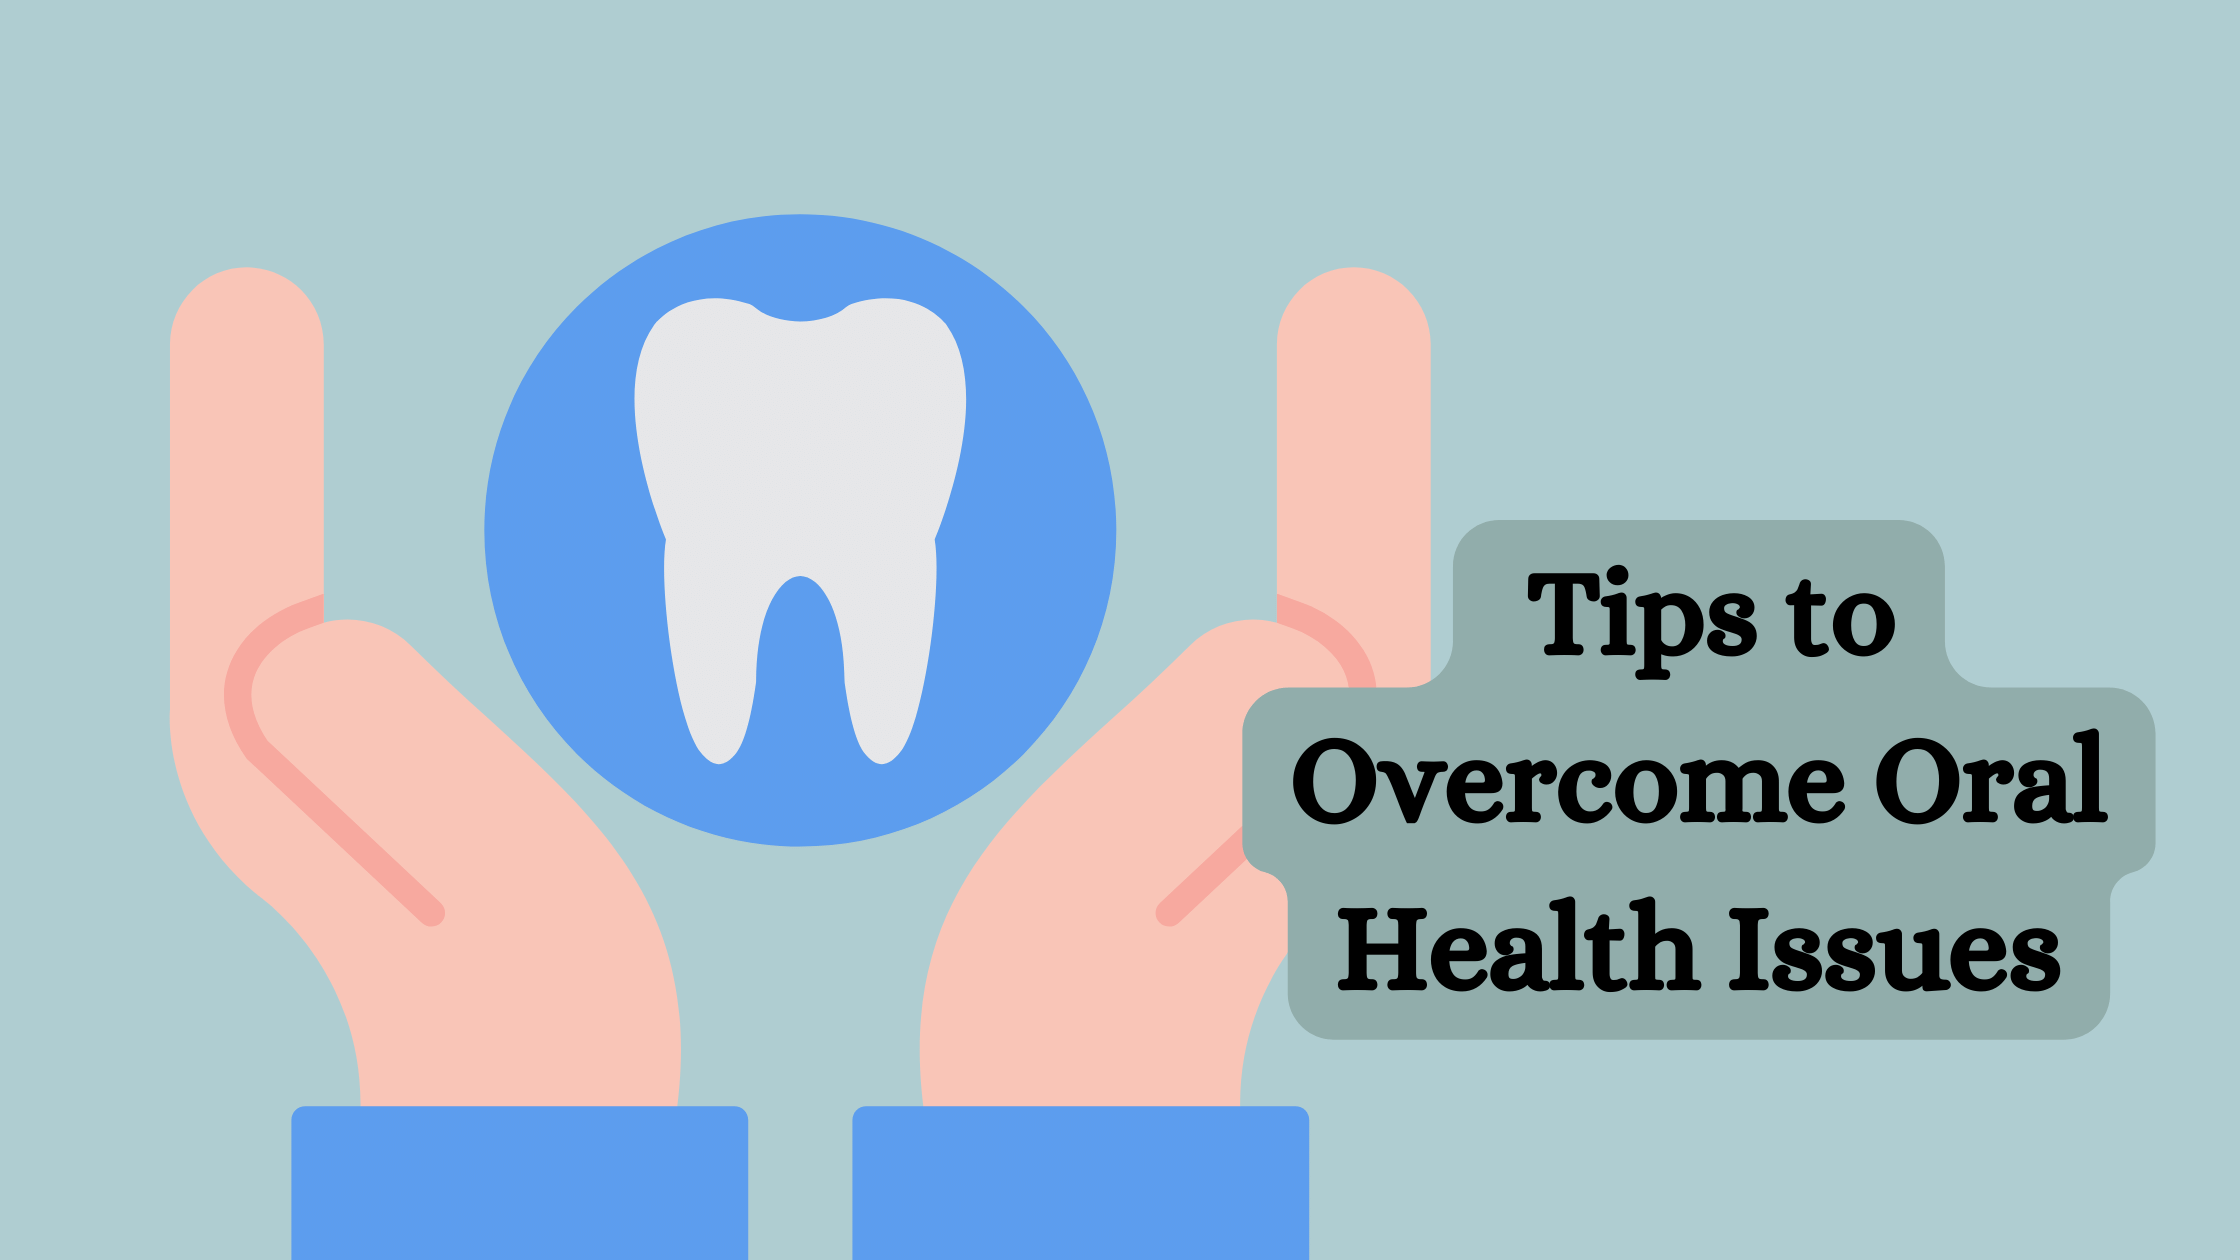 Tips to Overcome Oral Health Issues